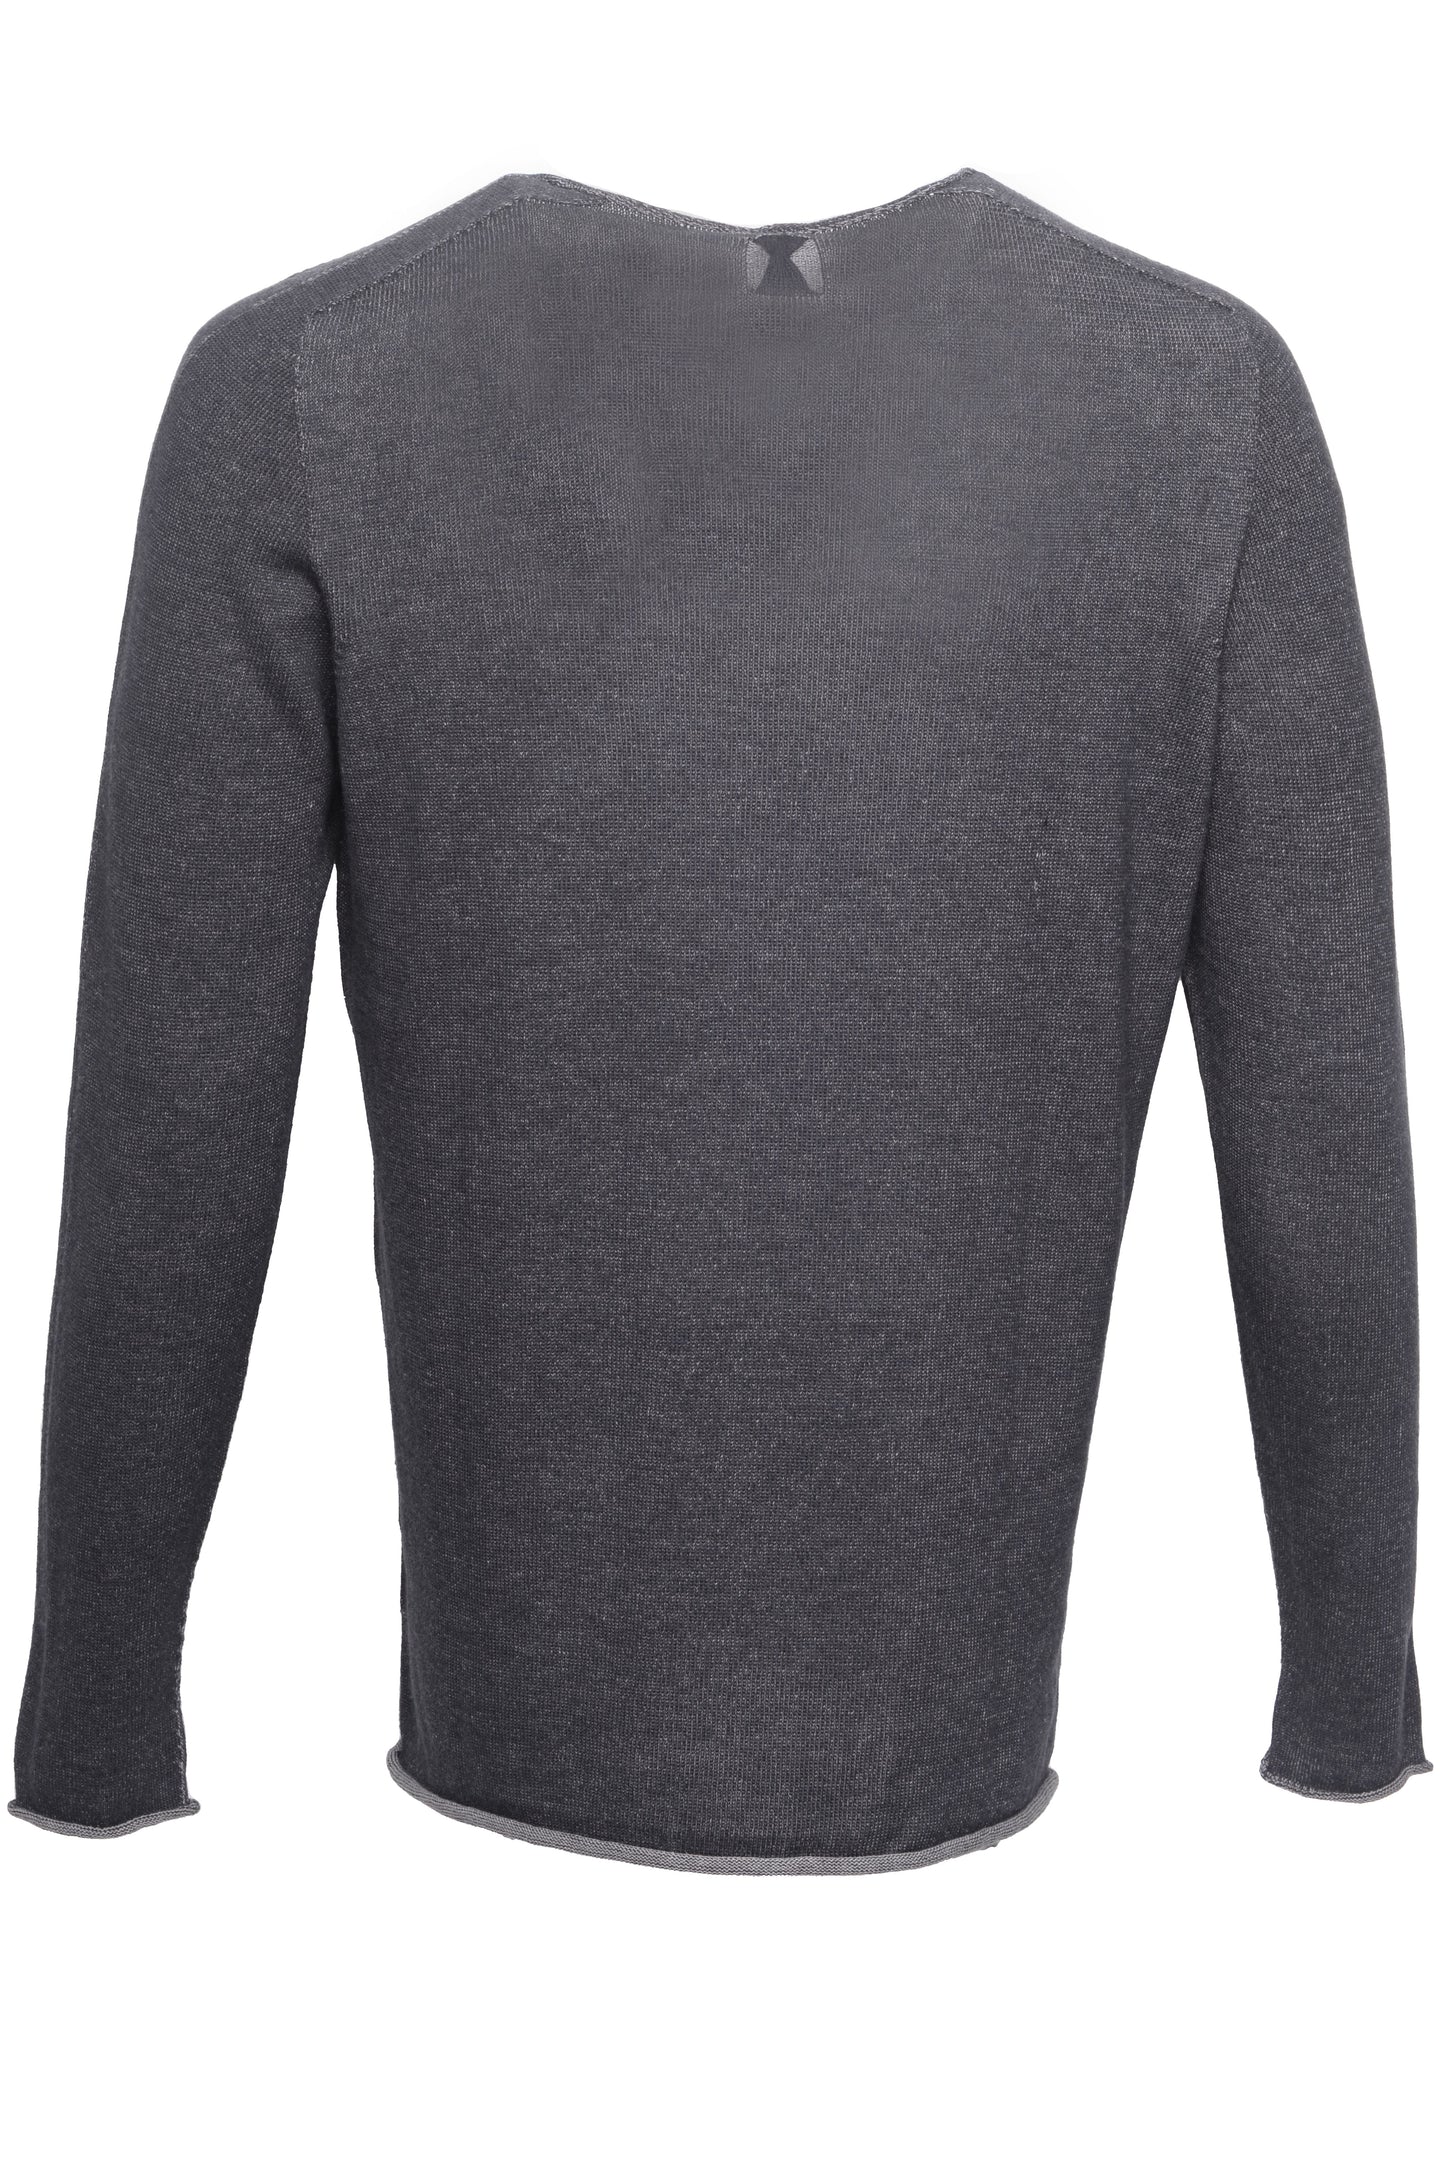 
                  
                    HANNES ROETHER MALE SWEATER 110941 90%CO 10%WS 090 BLACK/TUNNEL
                  
                